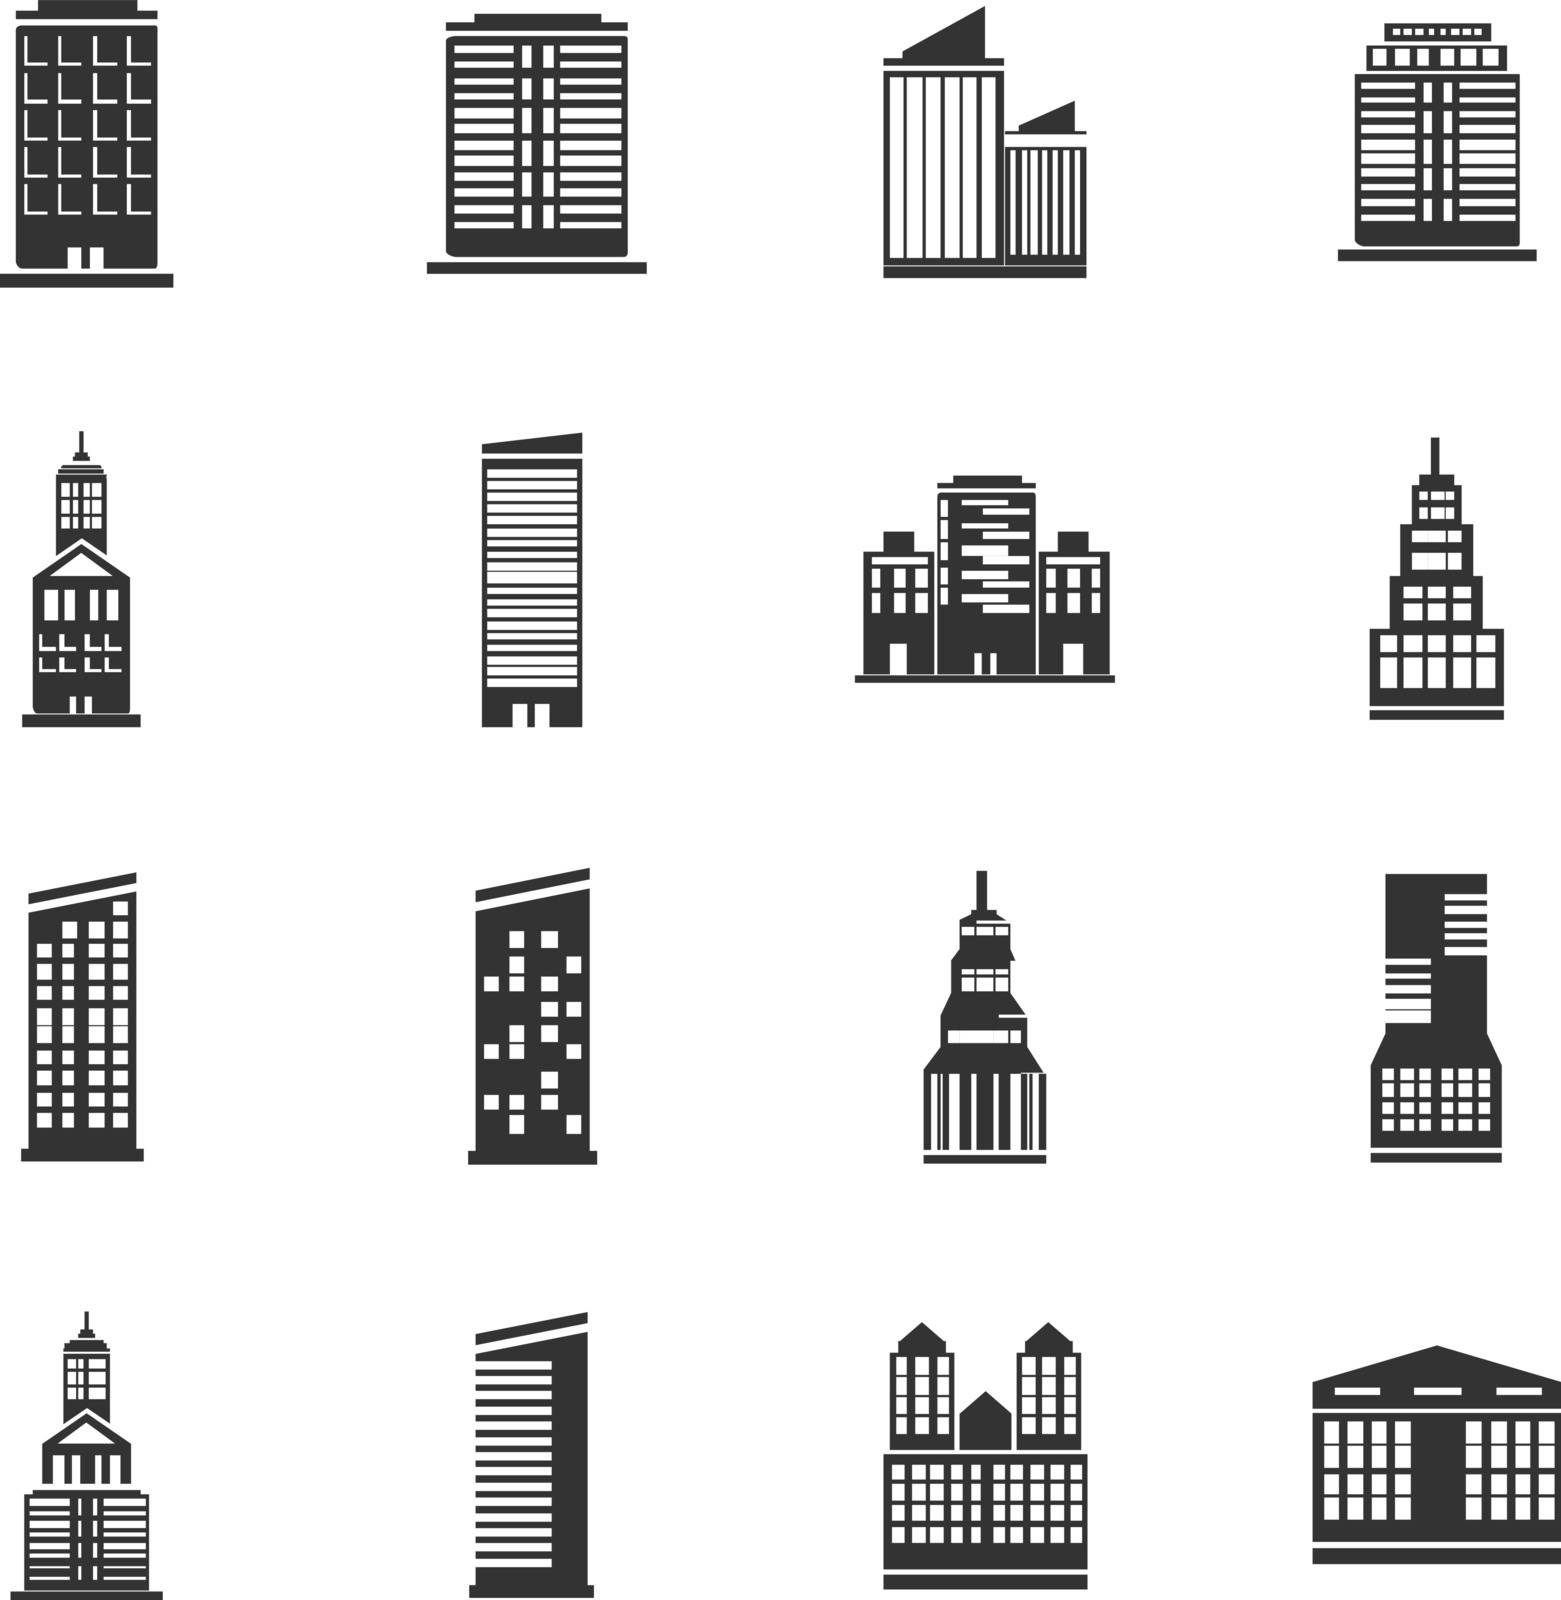 Buildings symbol for web icons and user interface